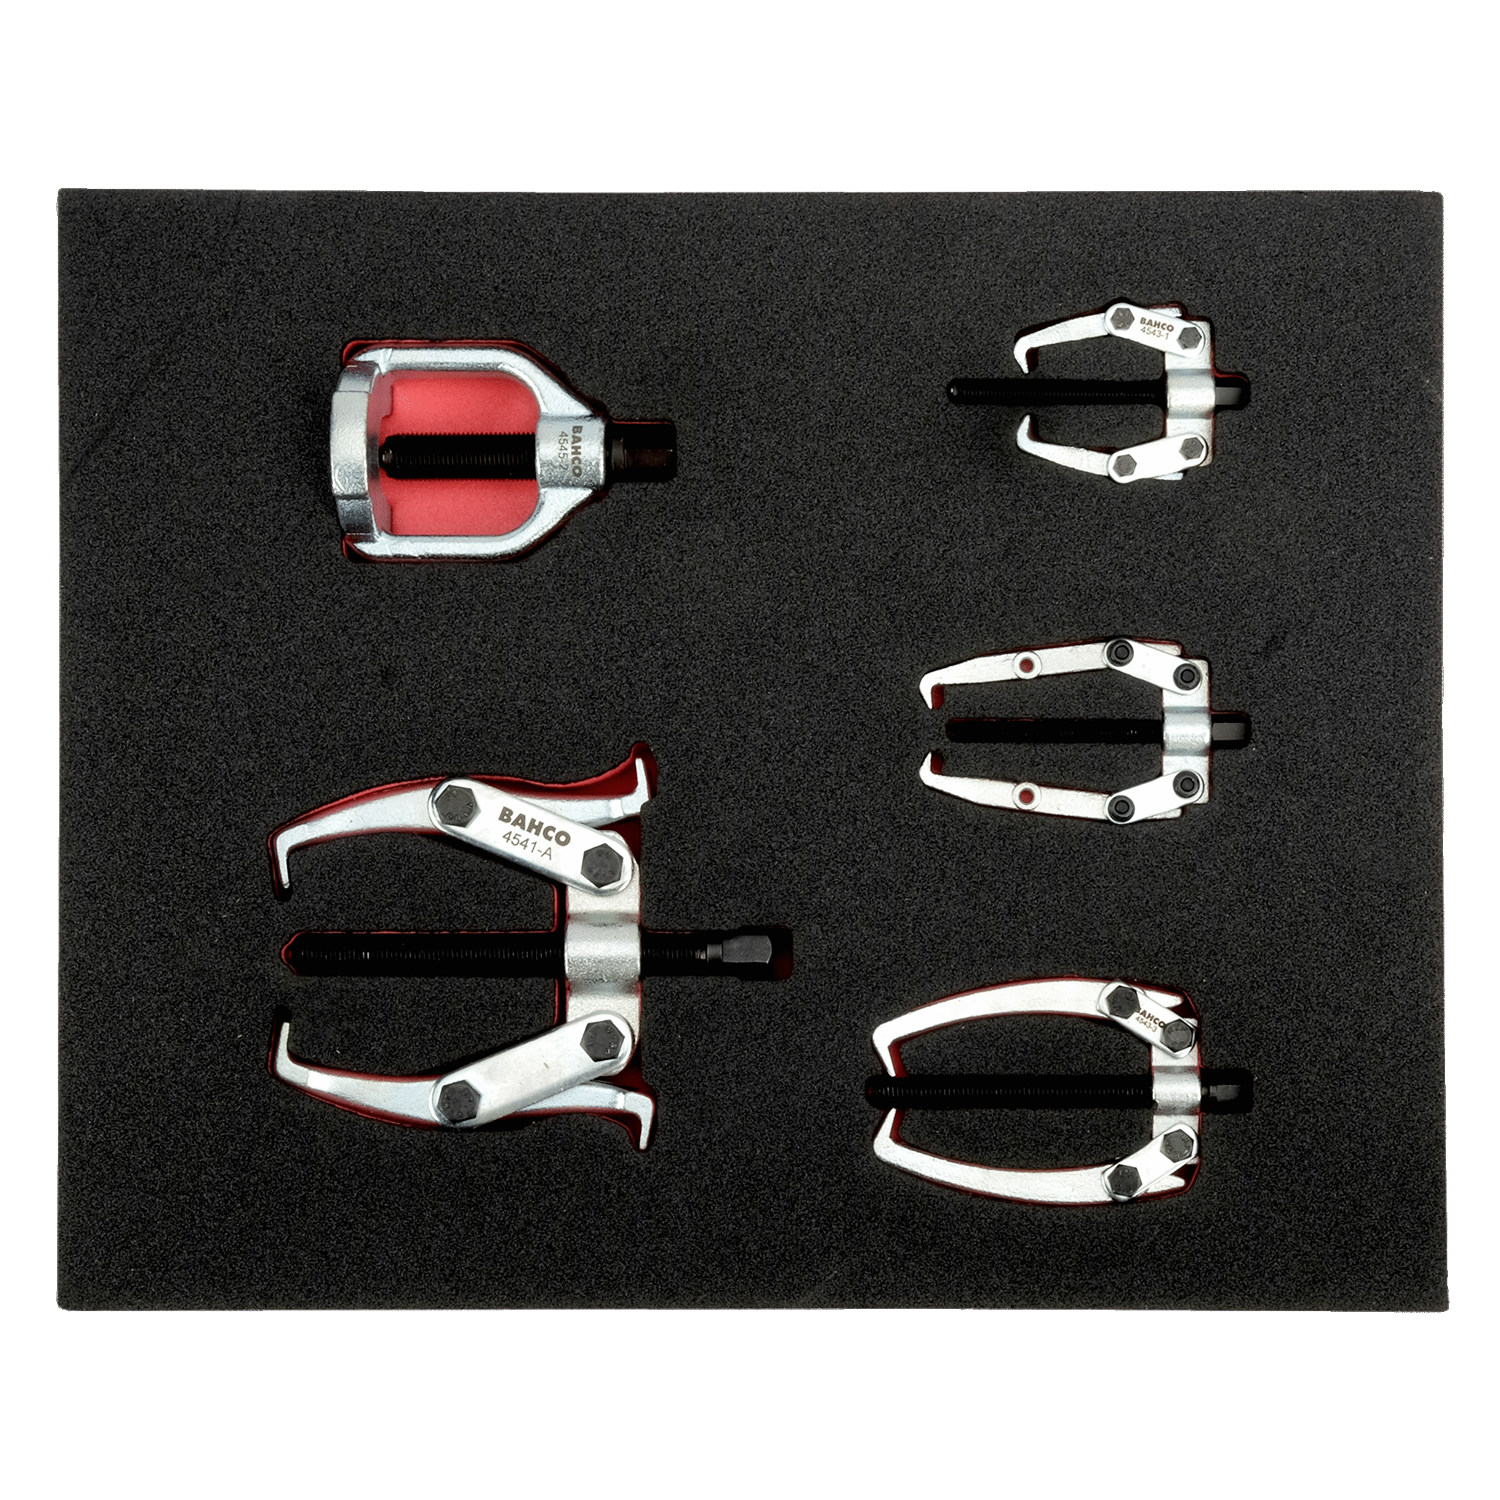 BAHCO FF1F5007 Fit&Go 2/3 Foam Inlay Puller Set - 5 Pcs - Premium Foam Inlay Puller Set from BAHCO - Shop now at Yew Aik.